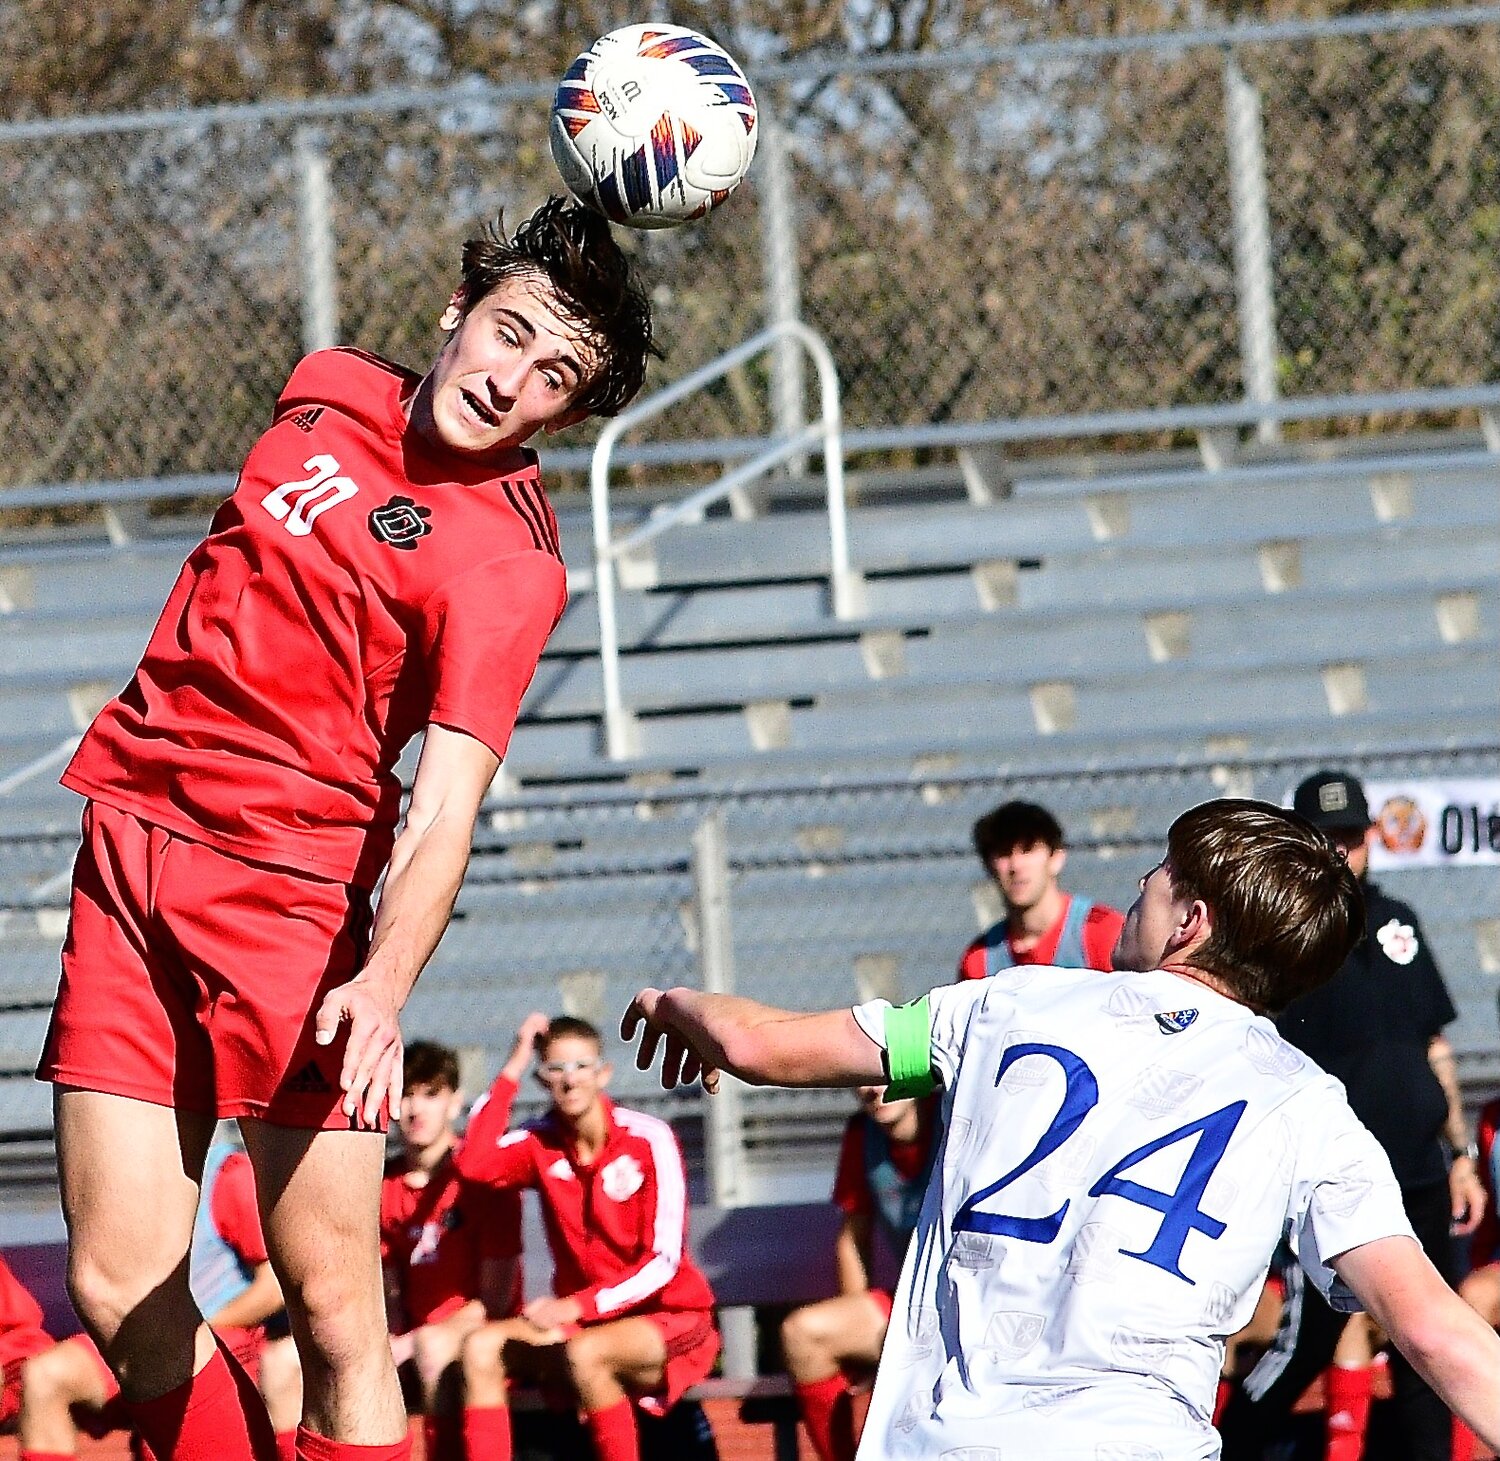 OZARK'S MICAH THRASHER makes a pass during the Tigers' Class 4 Quarterfinal match Saturday.